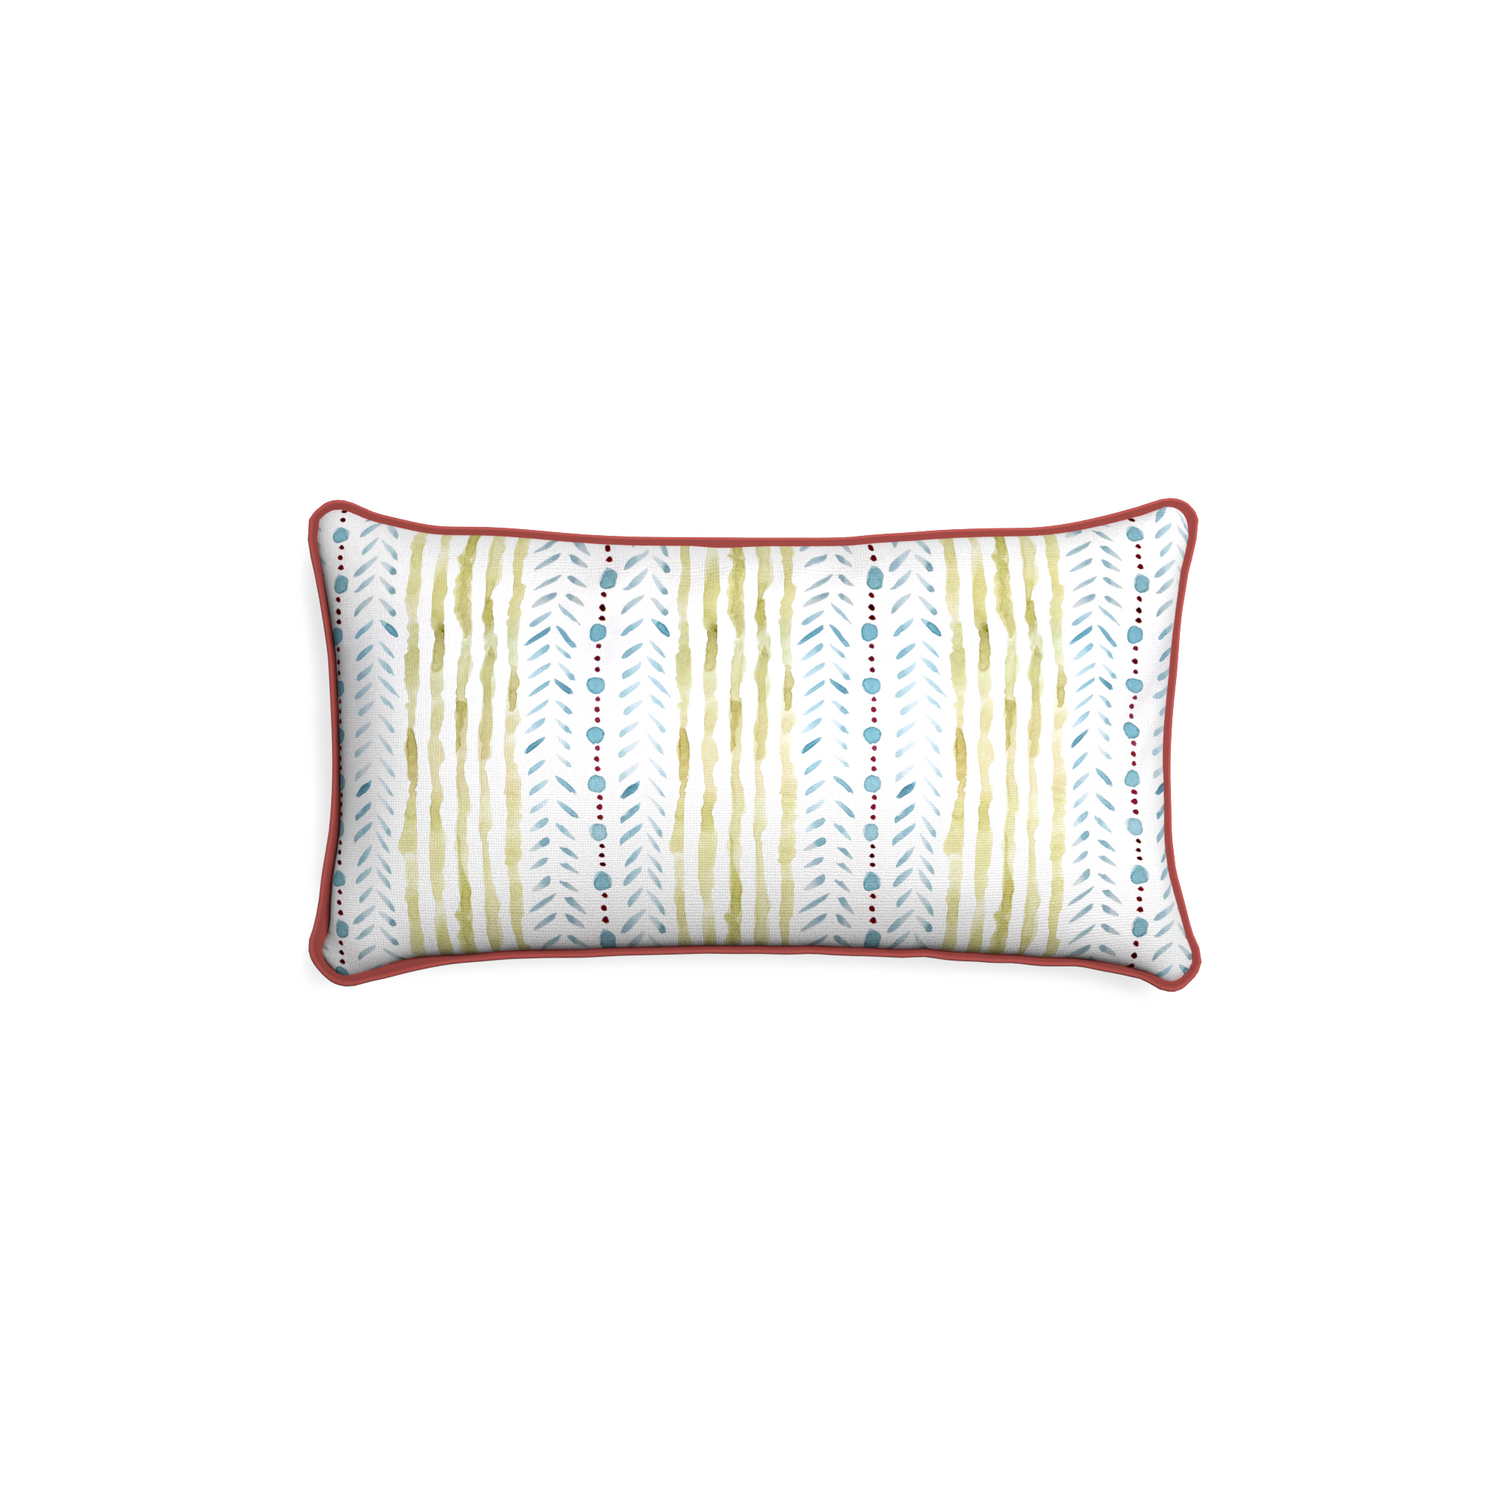 Petite-lumbar julia custom blue & green stripedpillow with c piping on white background